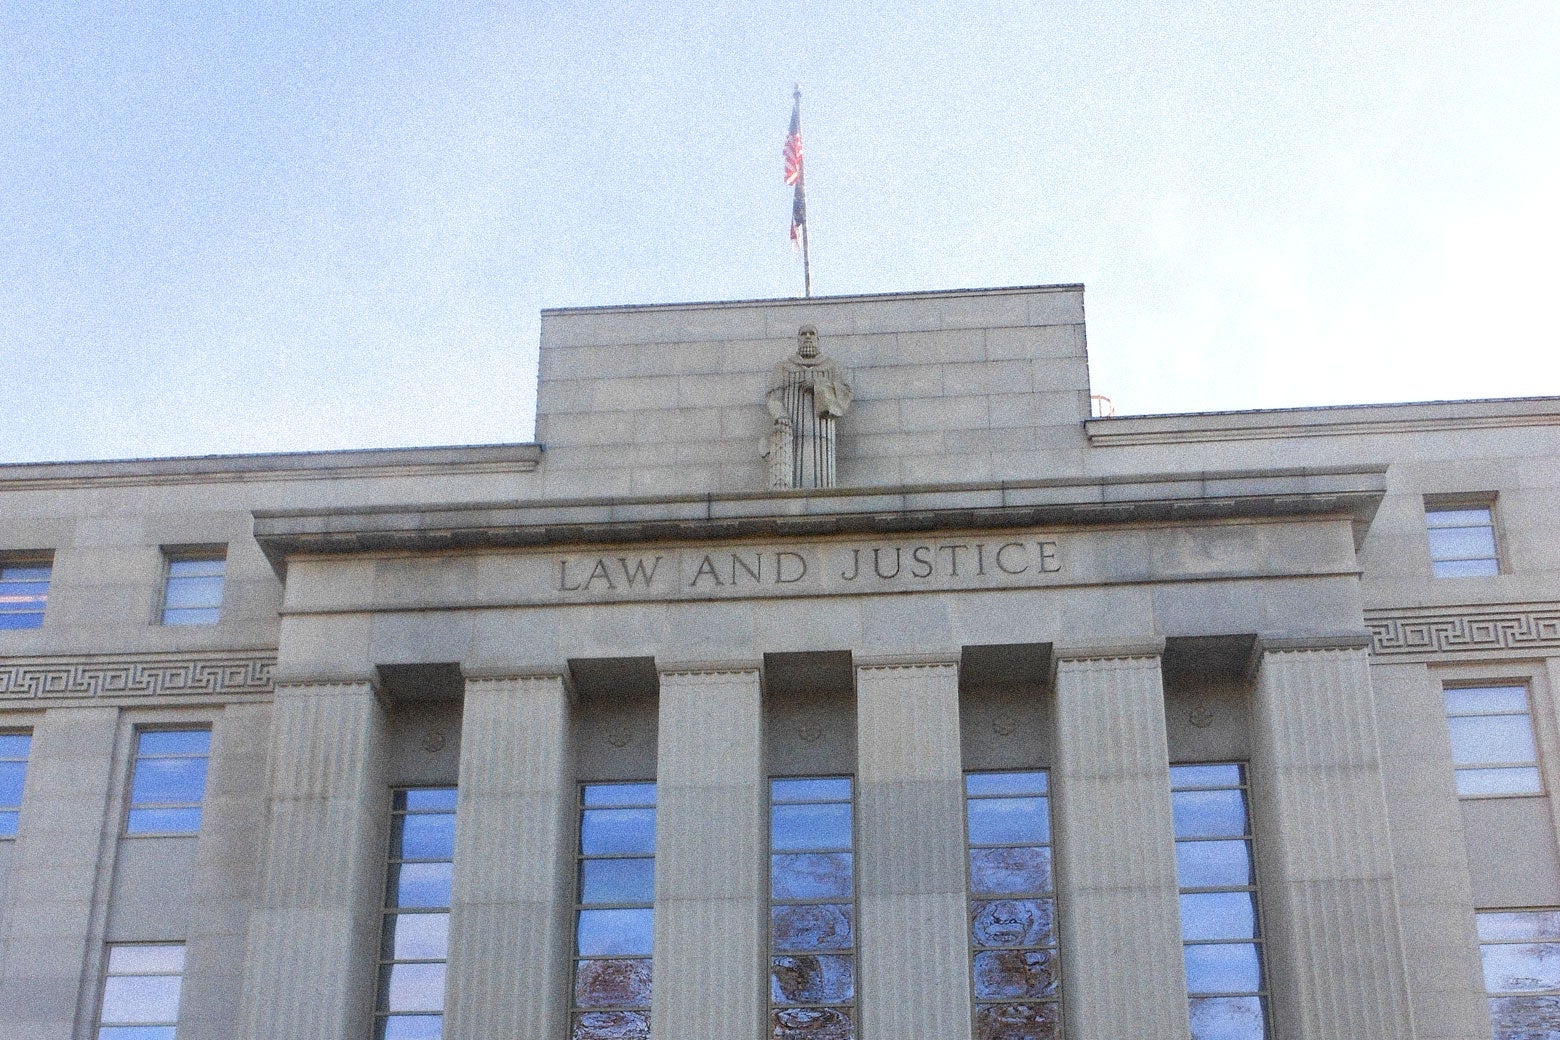 The exterior of the The North Carolina Supreme Court building.